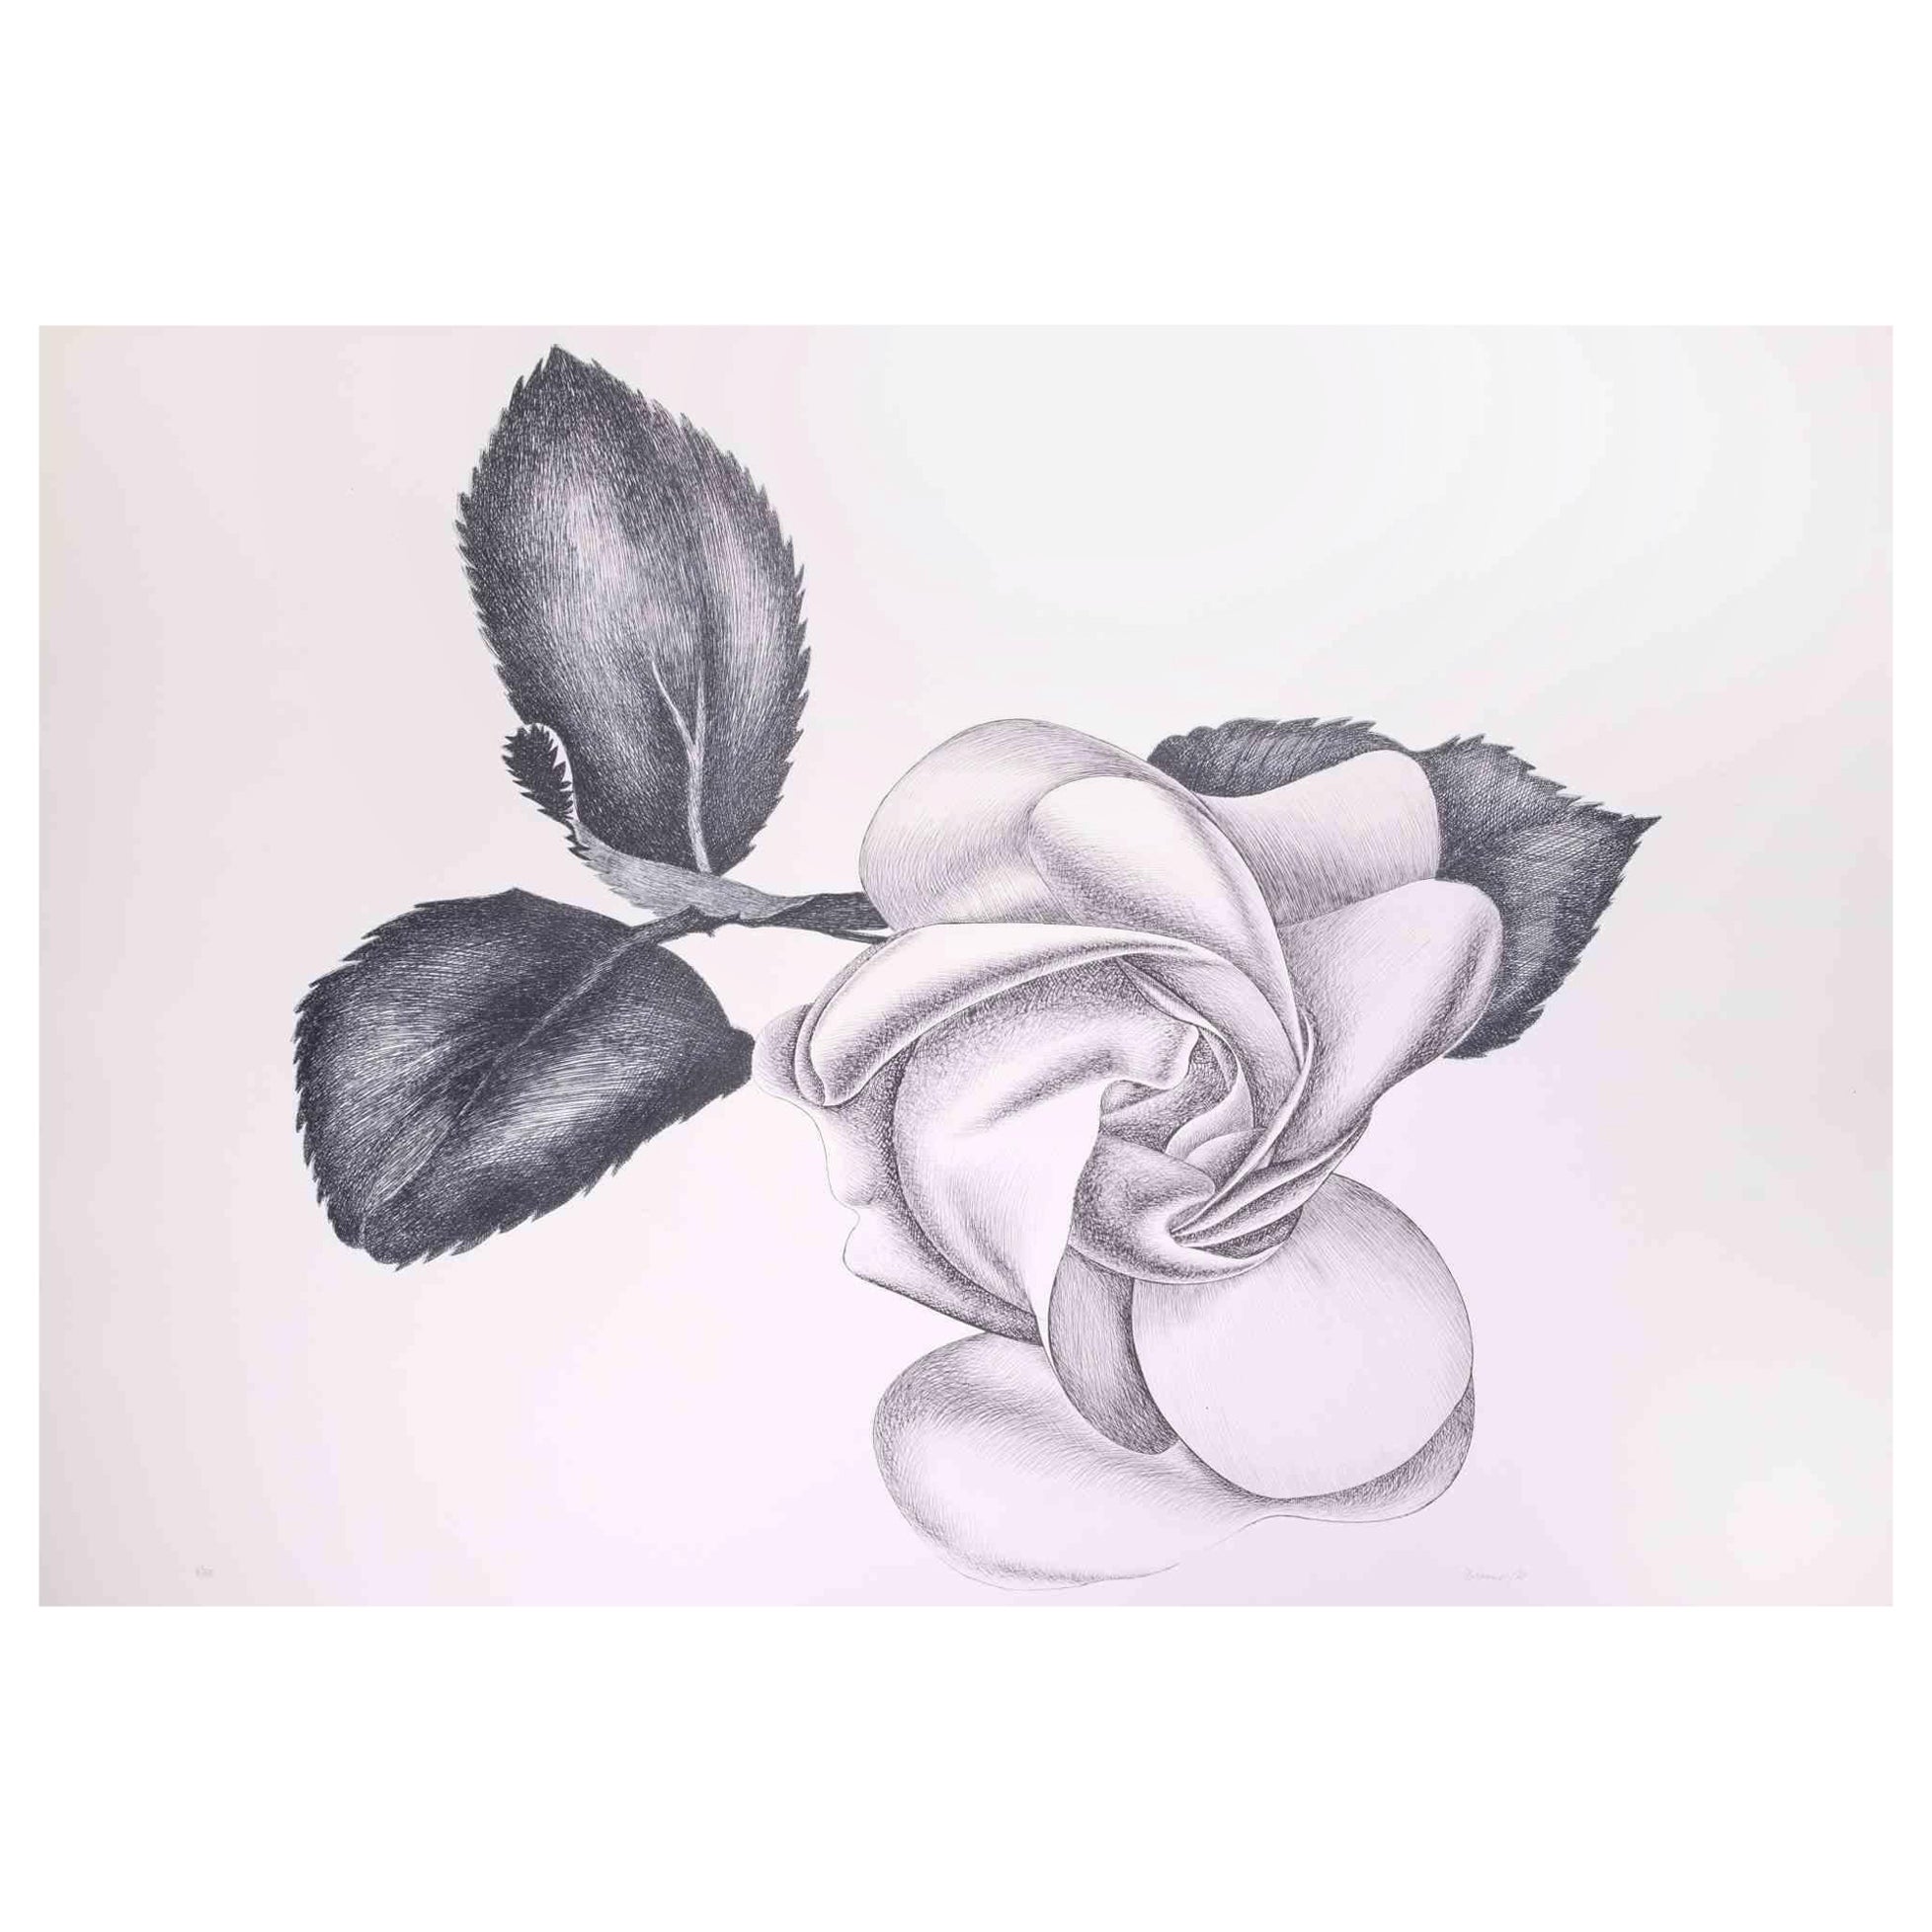 Black Rose is an original modern artowork realized by the Italian artist Giacomo Porzano (1925-2006) in 1972

Black and white etching.

Hand-signed and dated on the lower right. Edition 3/50.

Giacomo Porzano was born in Lerici on November 21, 1925